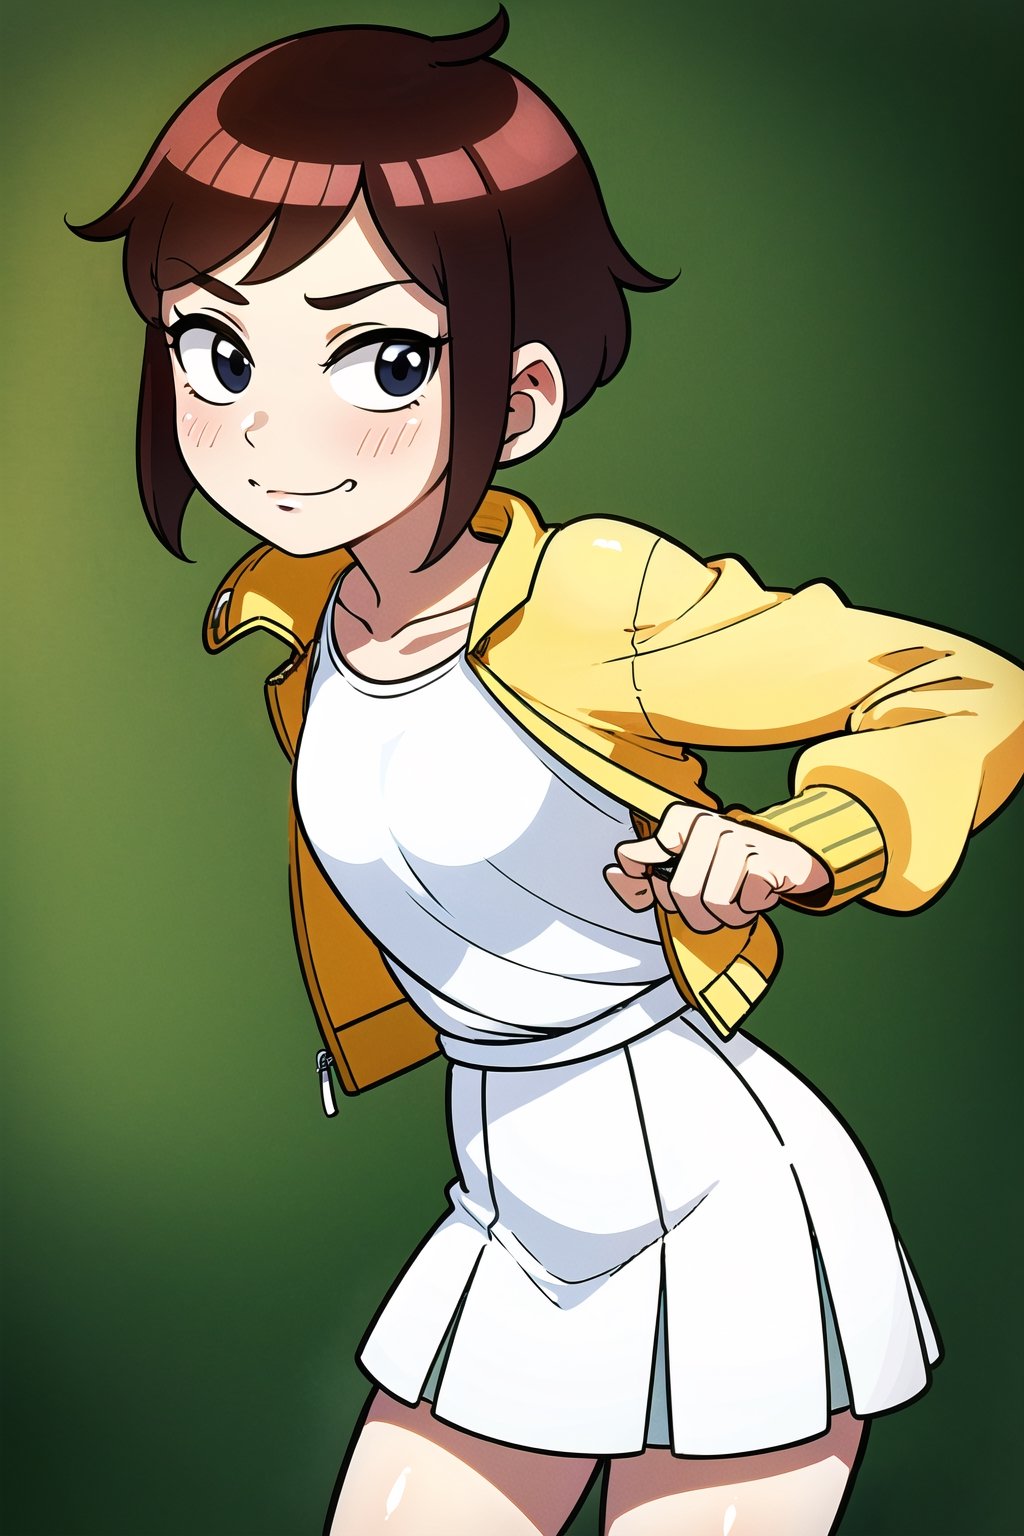 1girl, (wearing a yellow jacket with a white shirt), white skirt, looking at the camera,cartoon fanart style